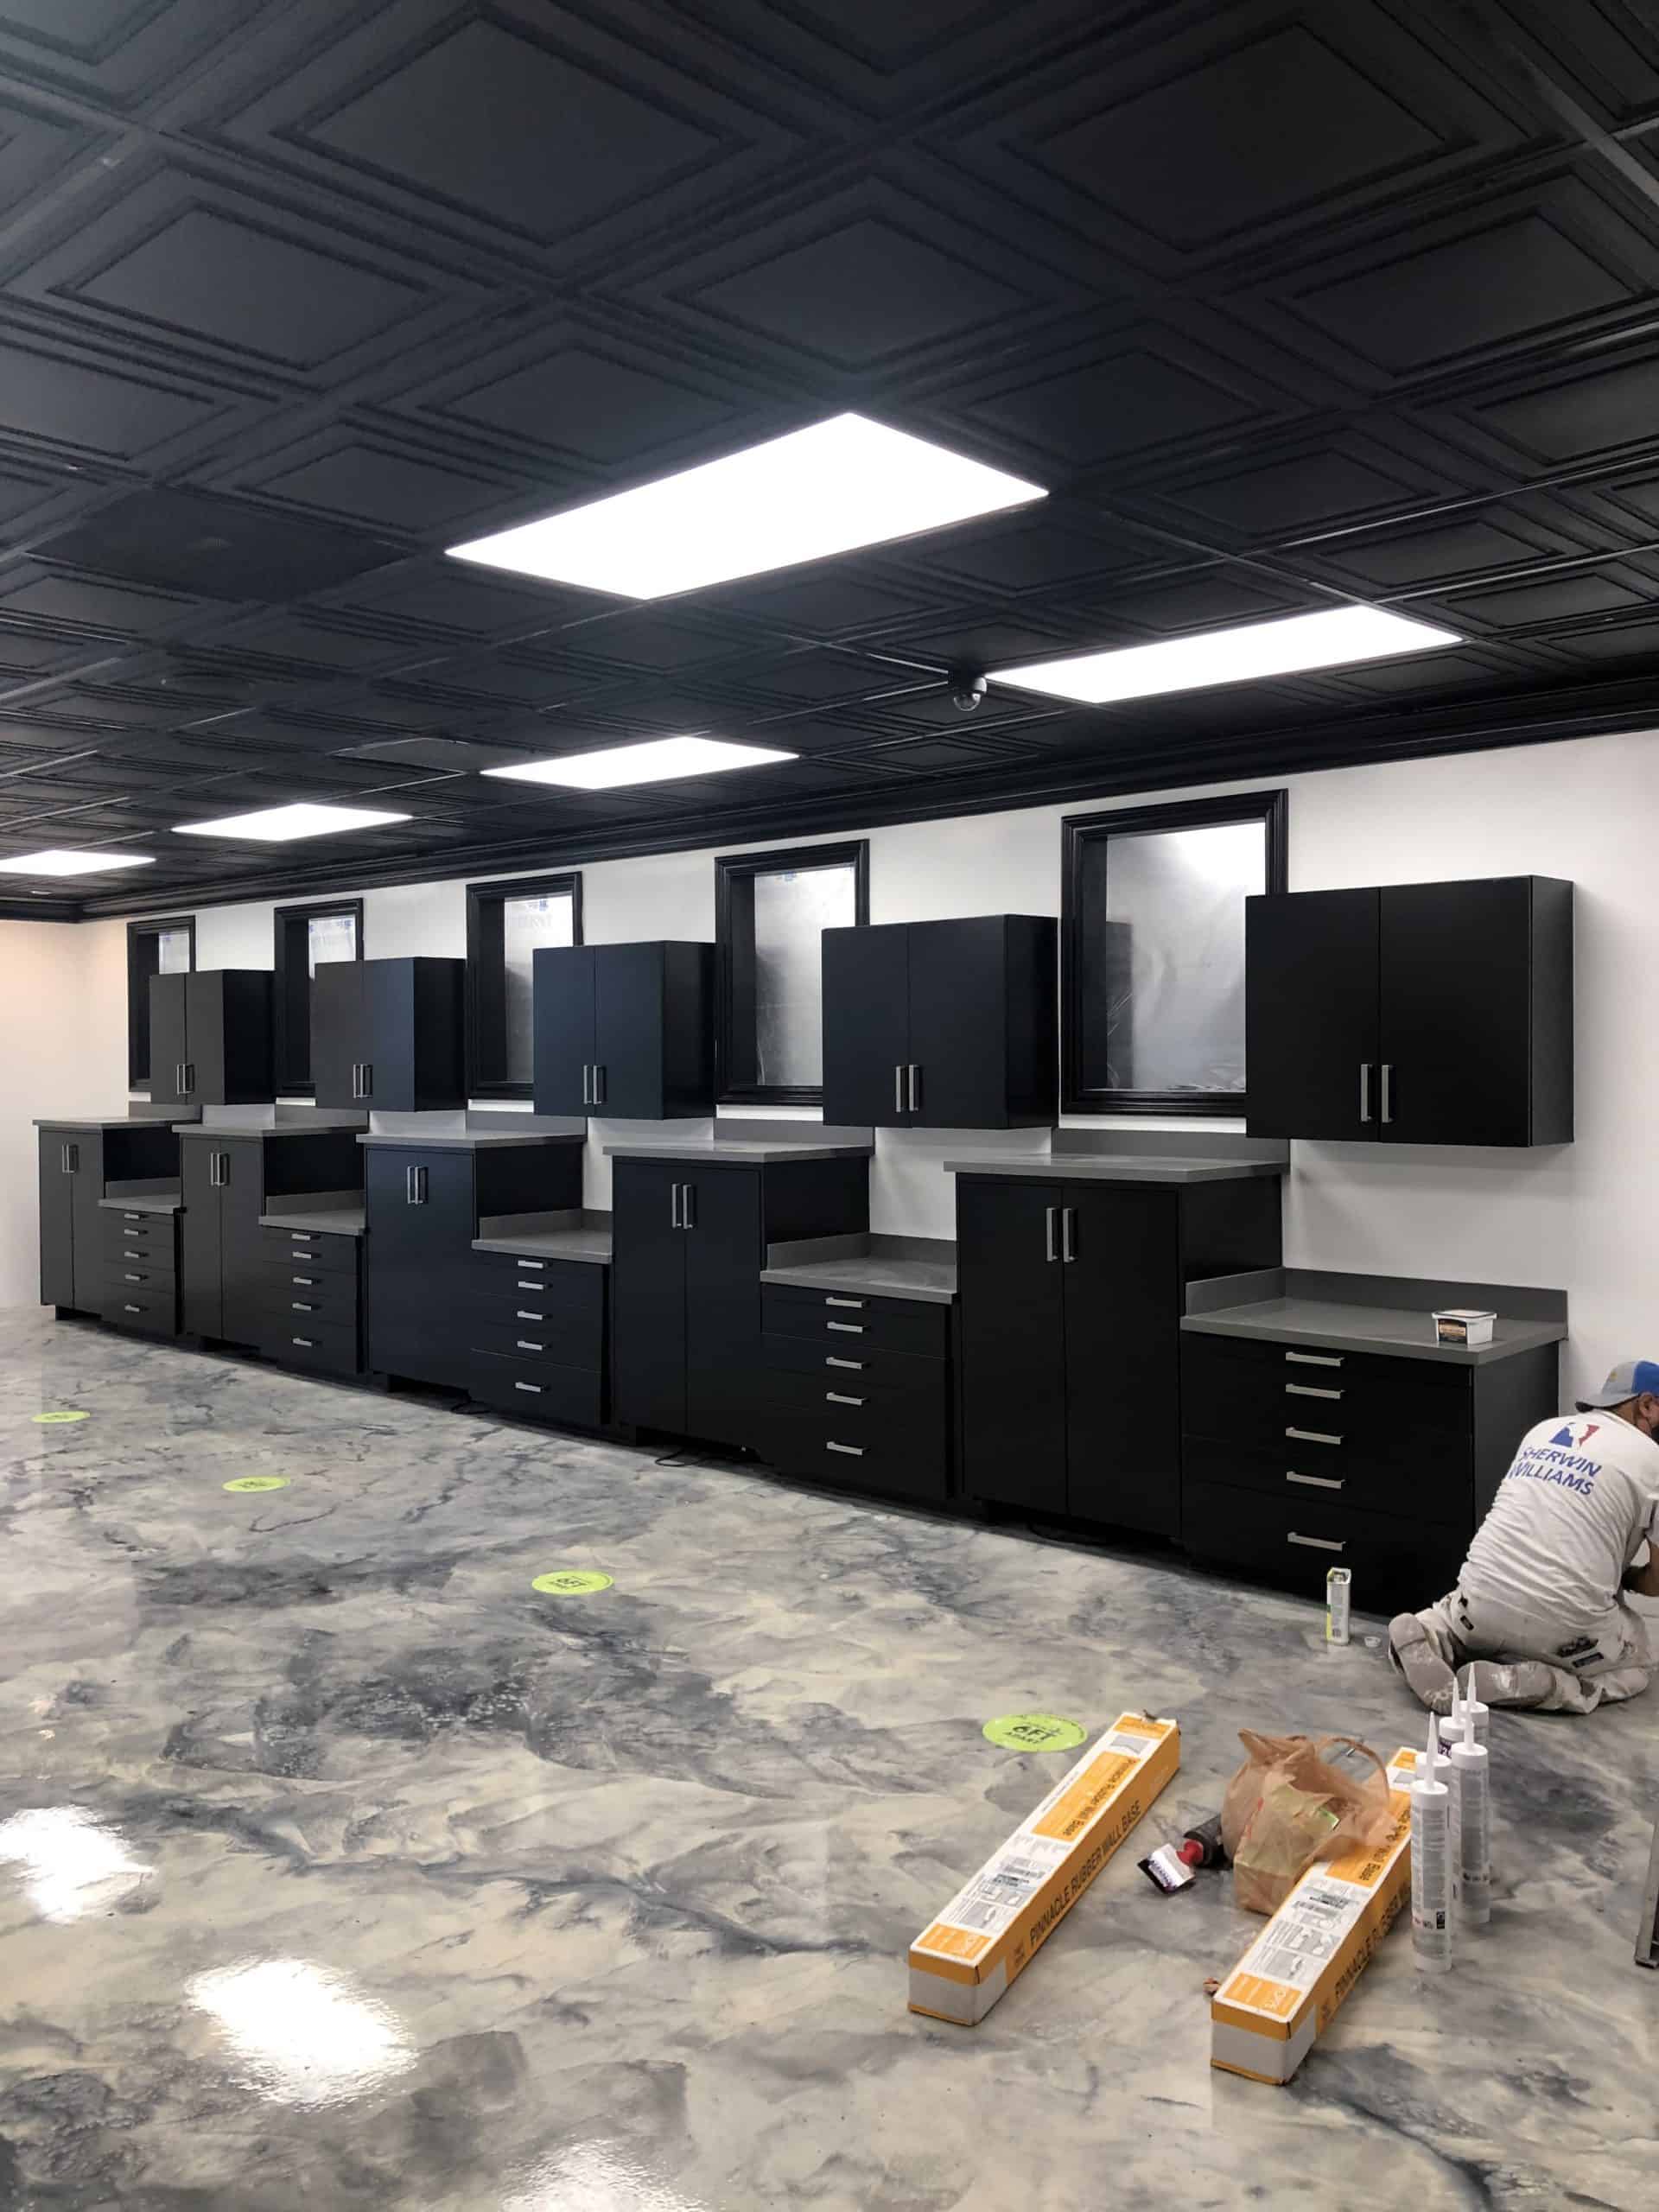 Black Cabinet Refinshing Project for a Commercial Space Completed